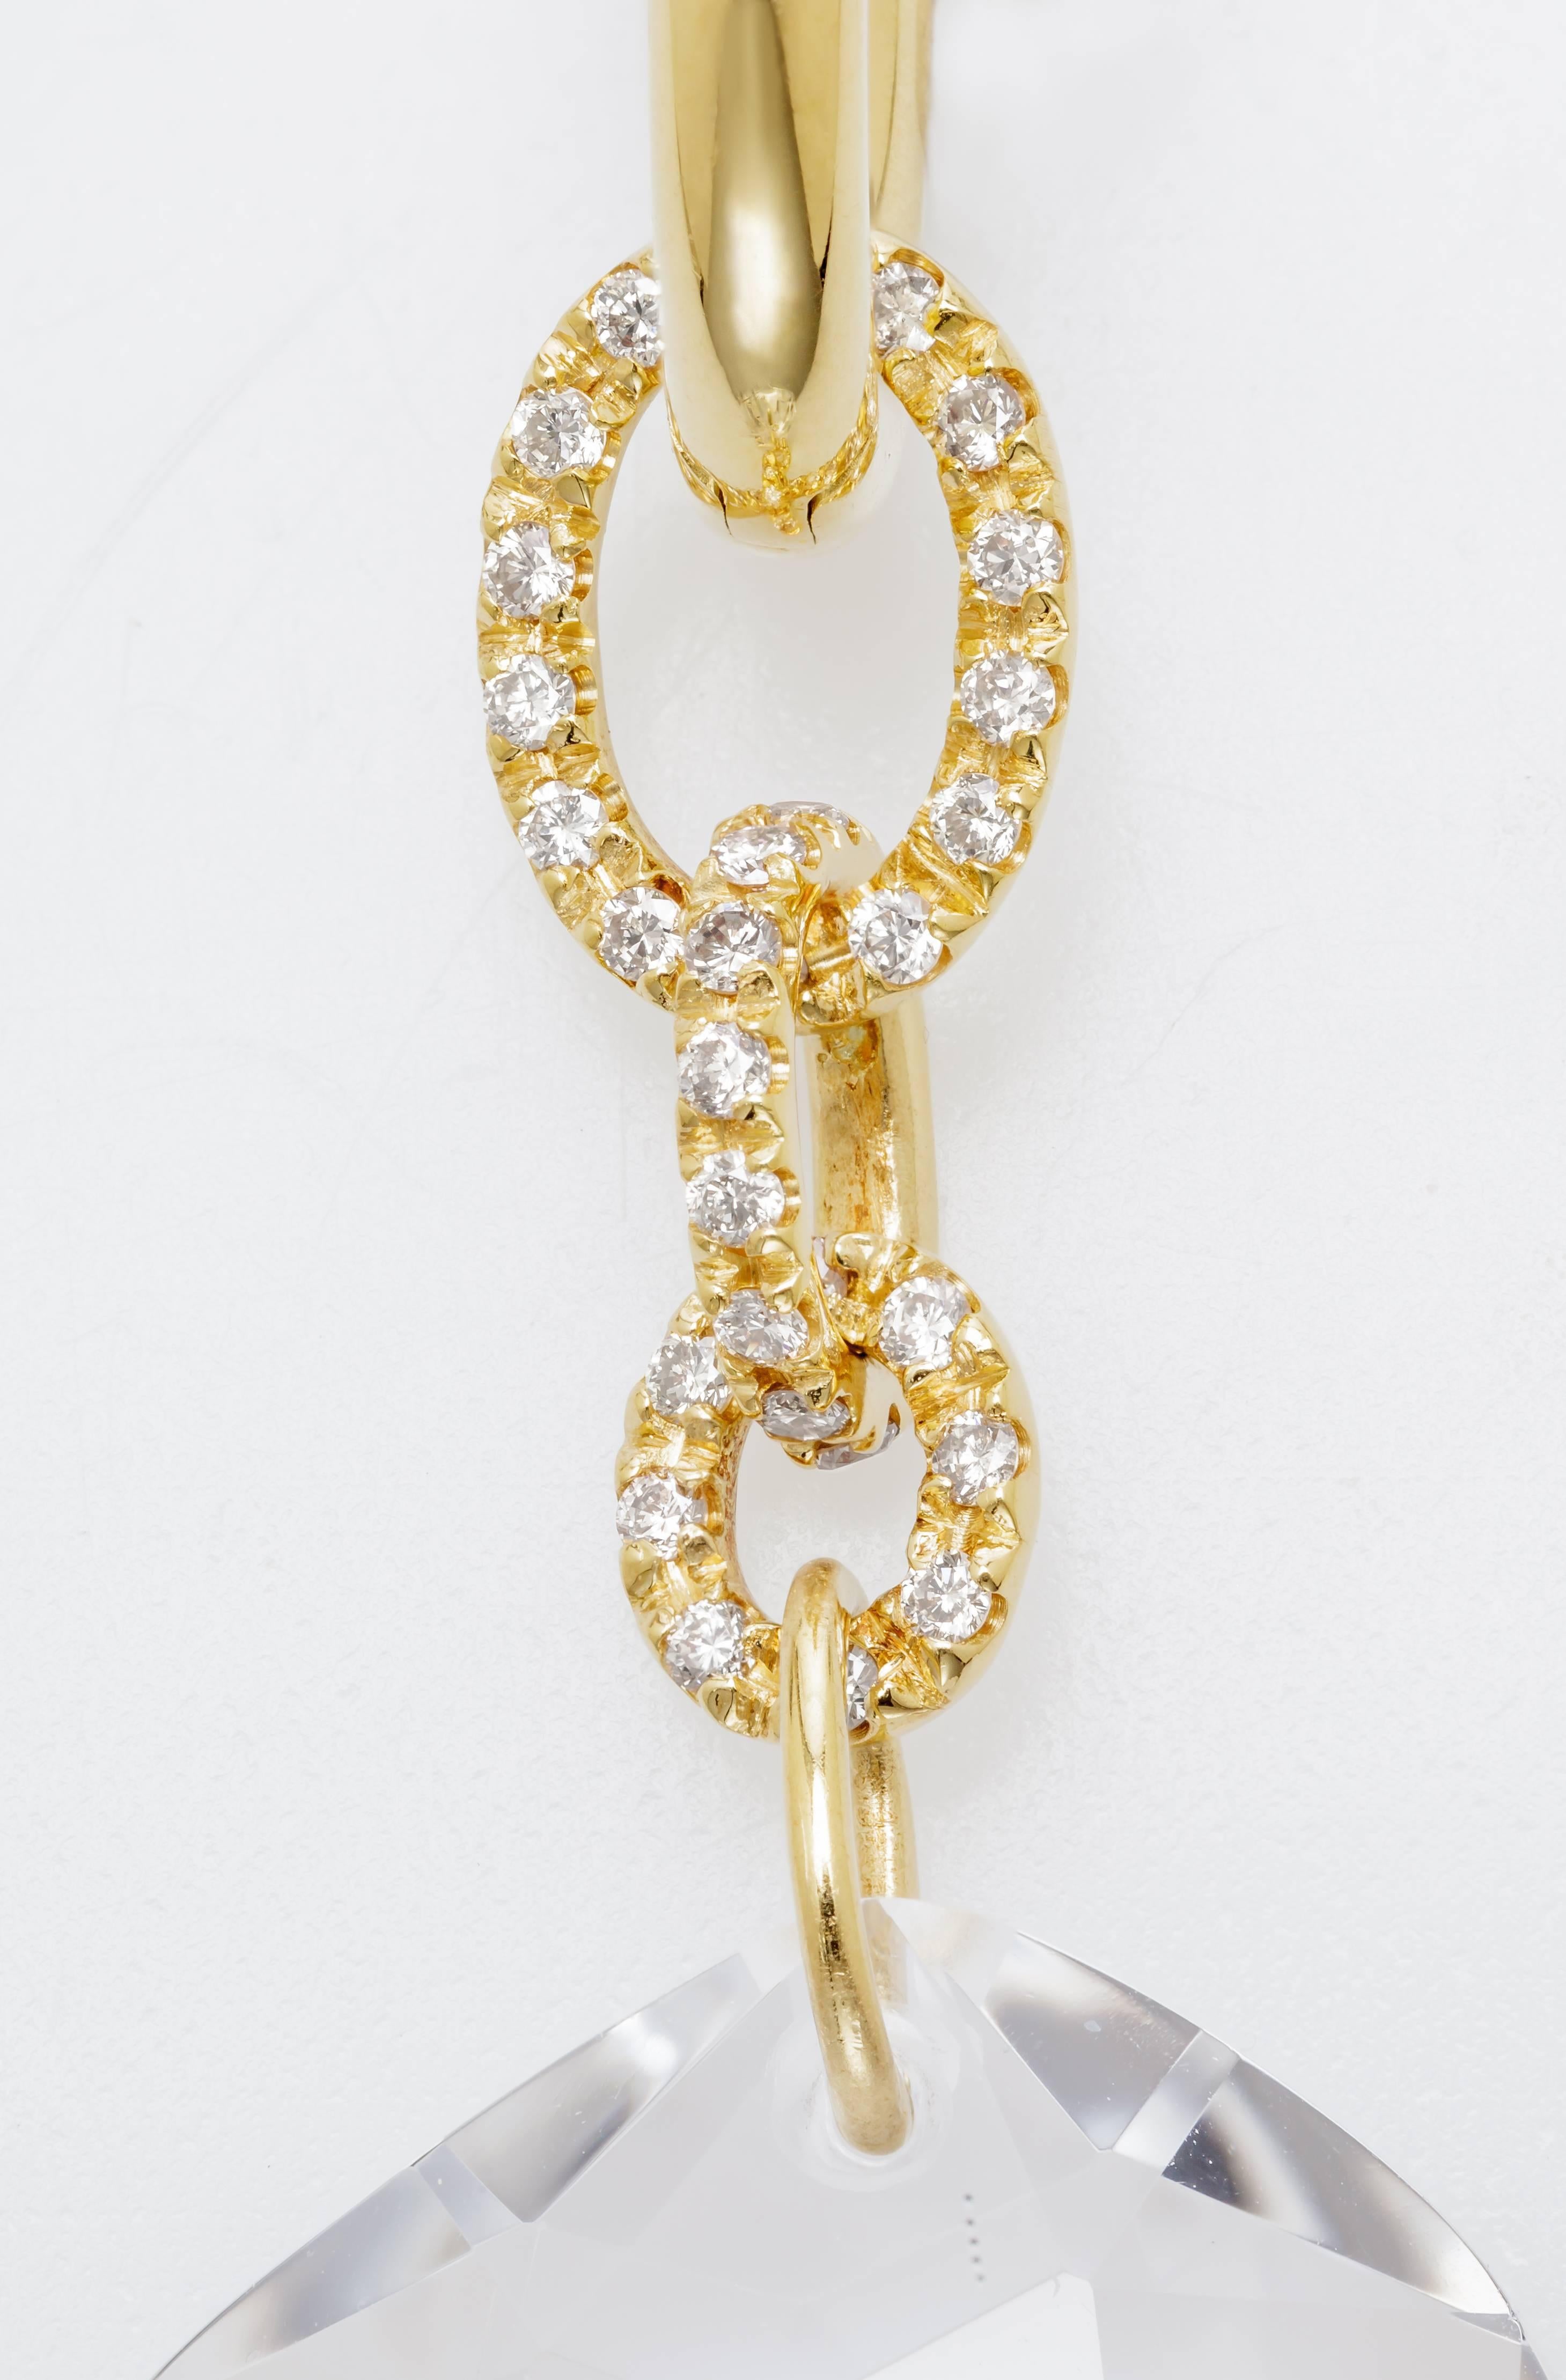 H. Stern DVF 100.35 Carat Quartz 0.79 Carat Diamonds Gold Earrings In New Condition For Sale In Houston, TX